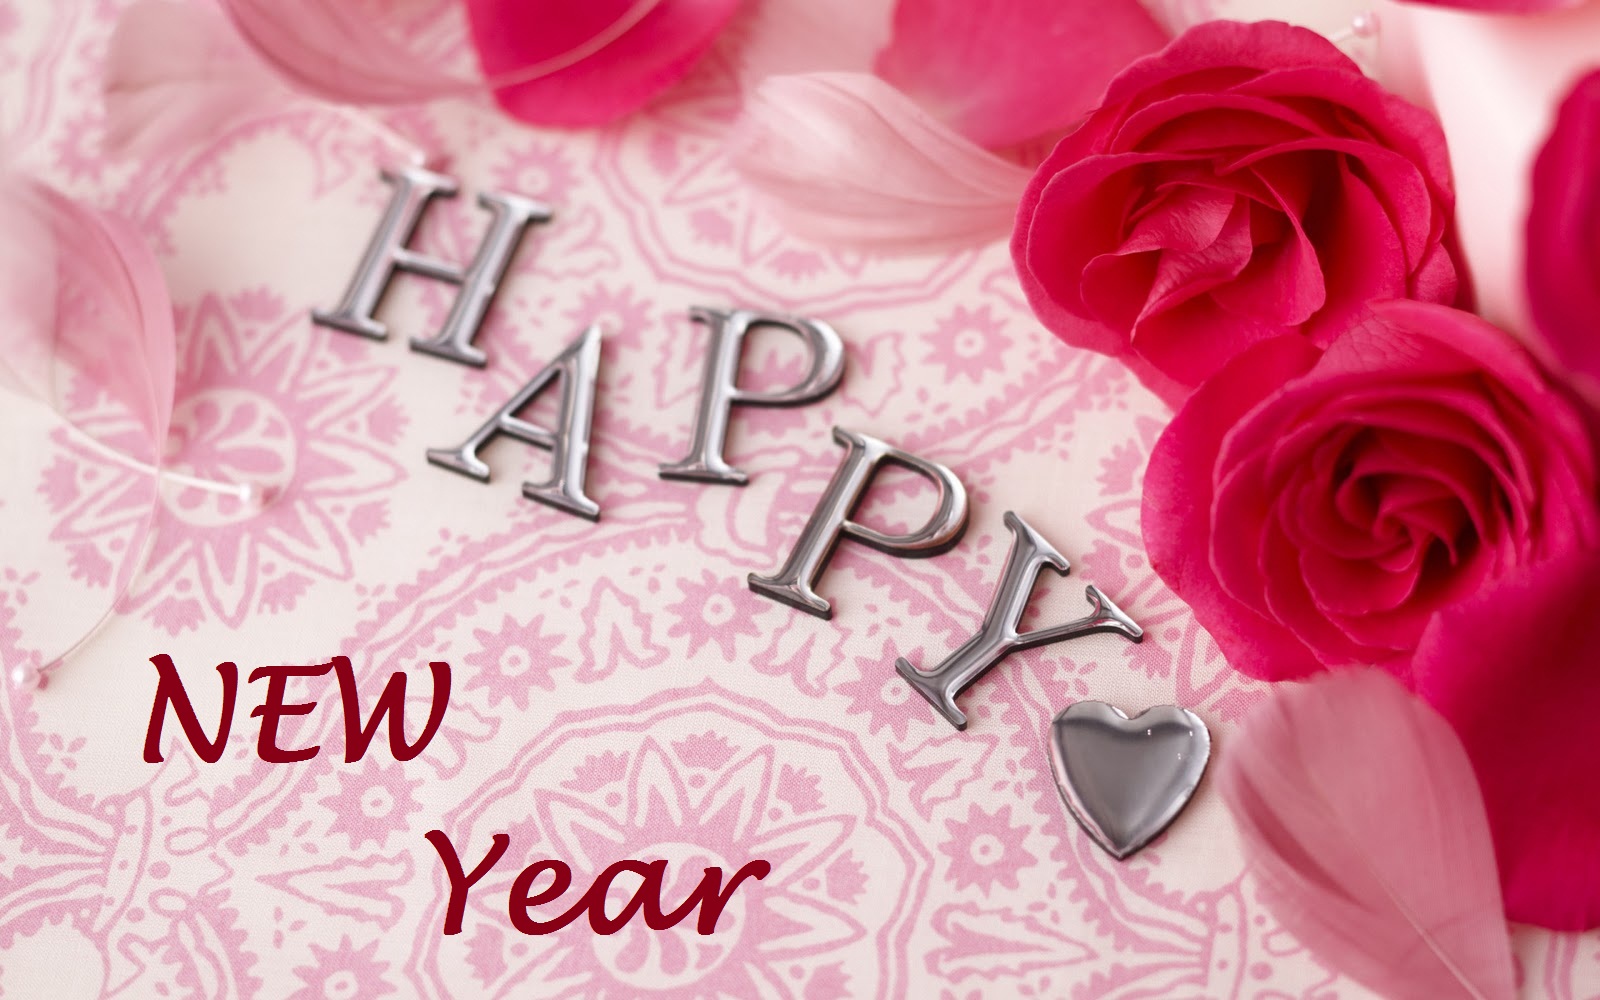 Best Collection of 999+ Love-inspired Happy New Year 2020 Images in Full 4K